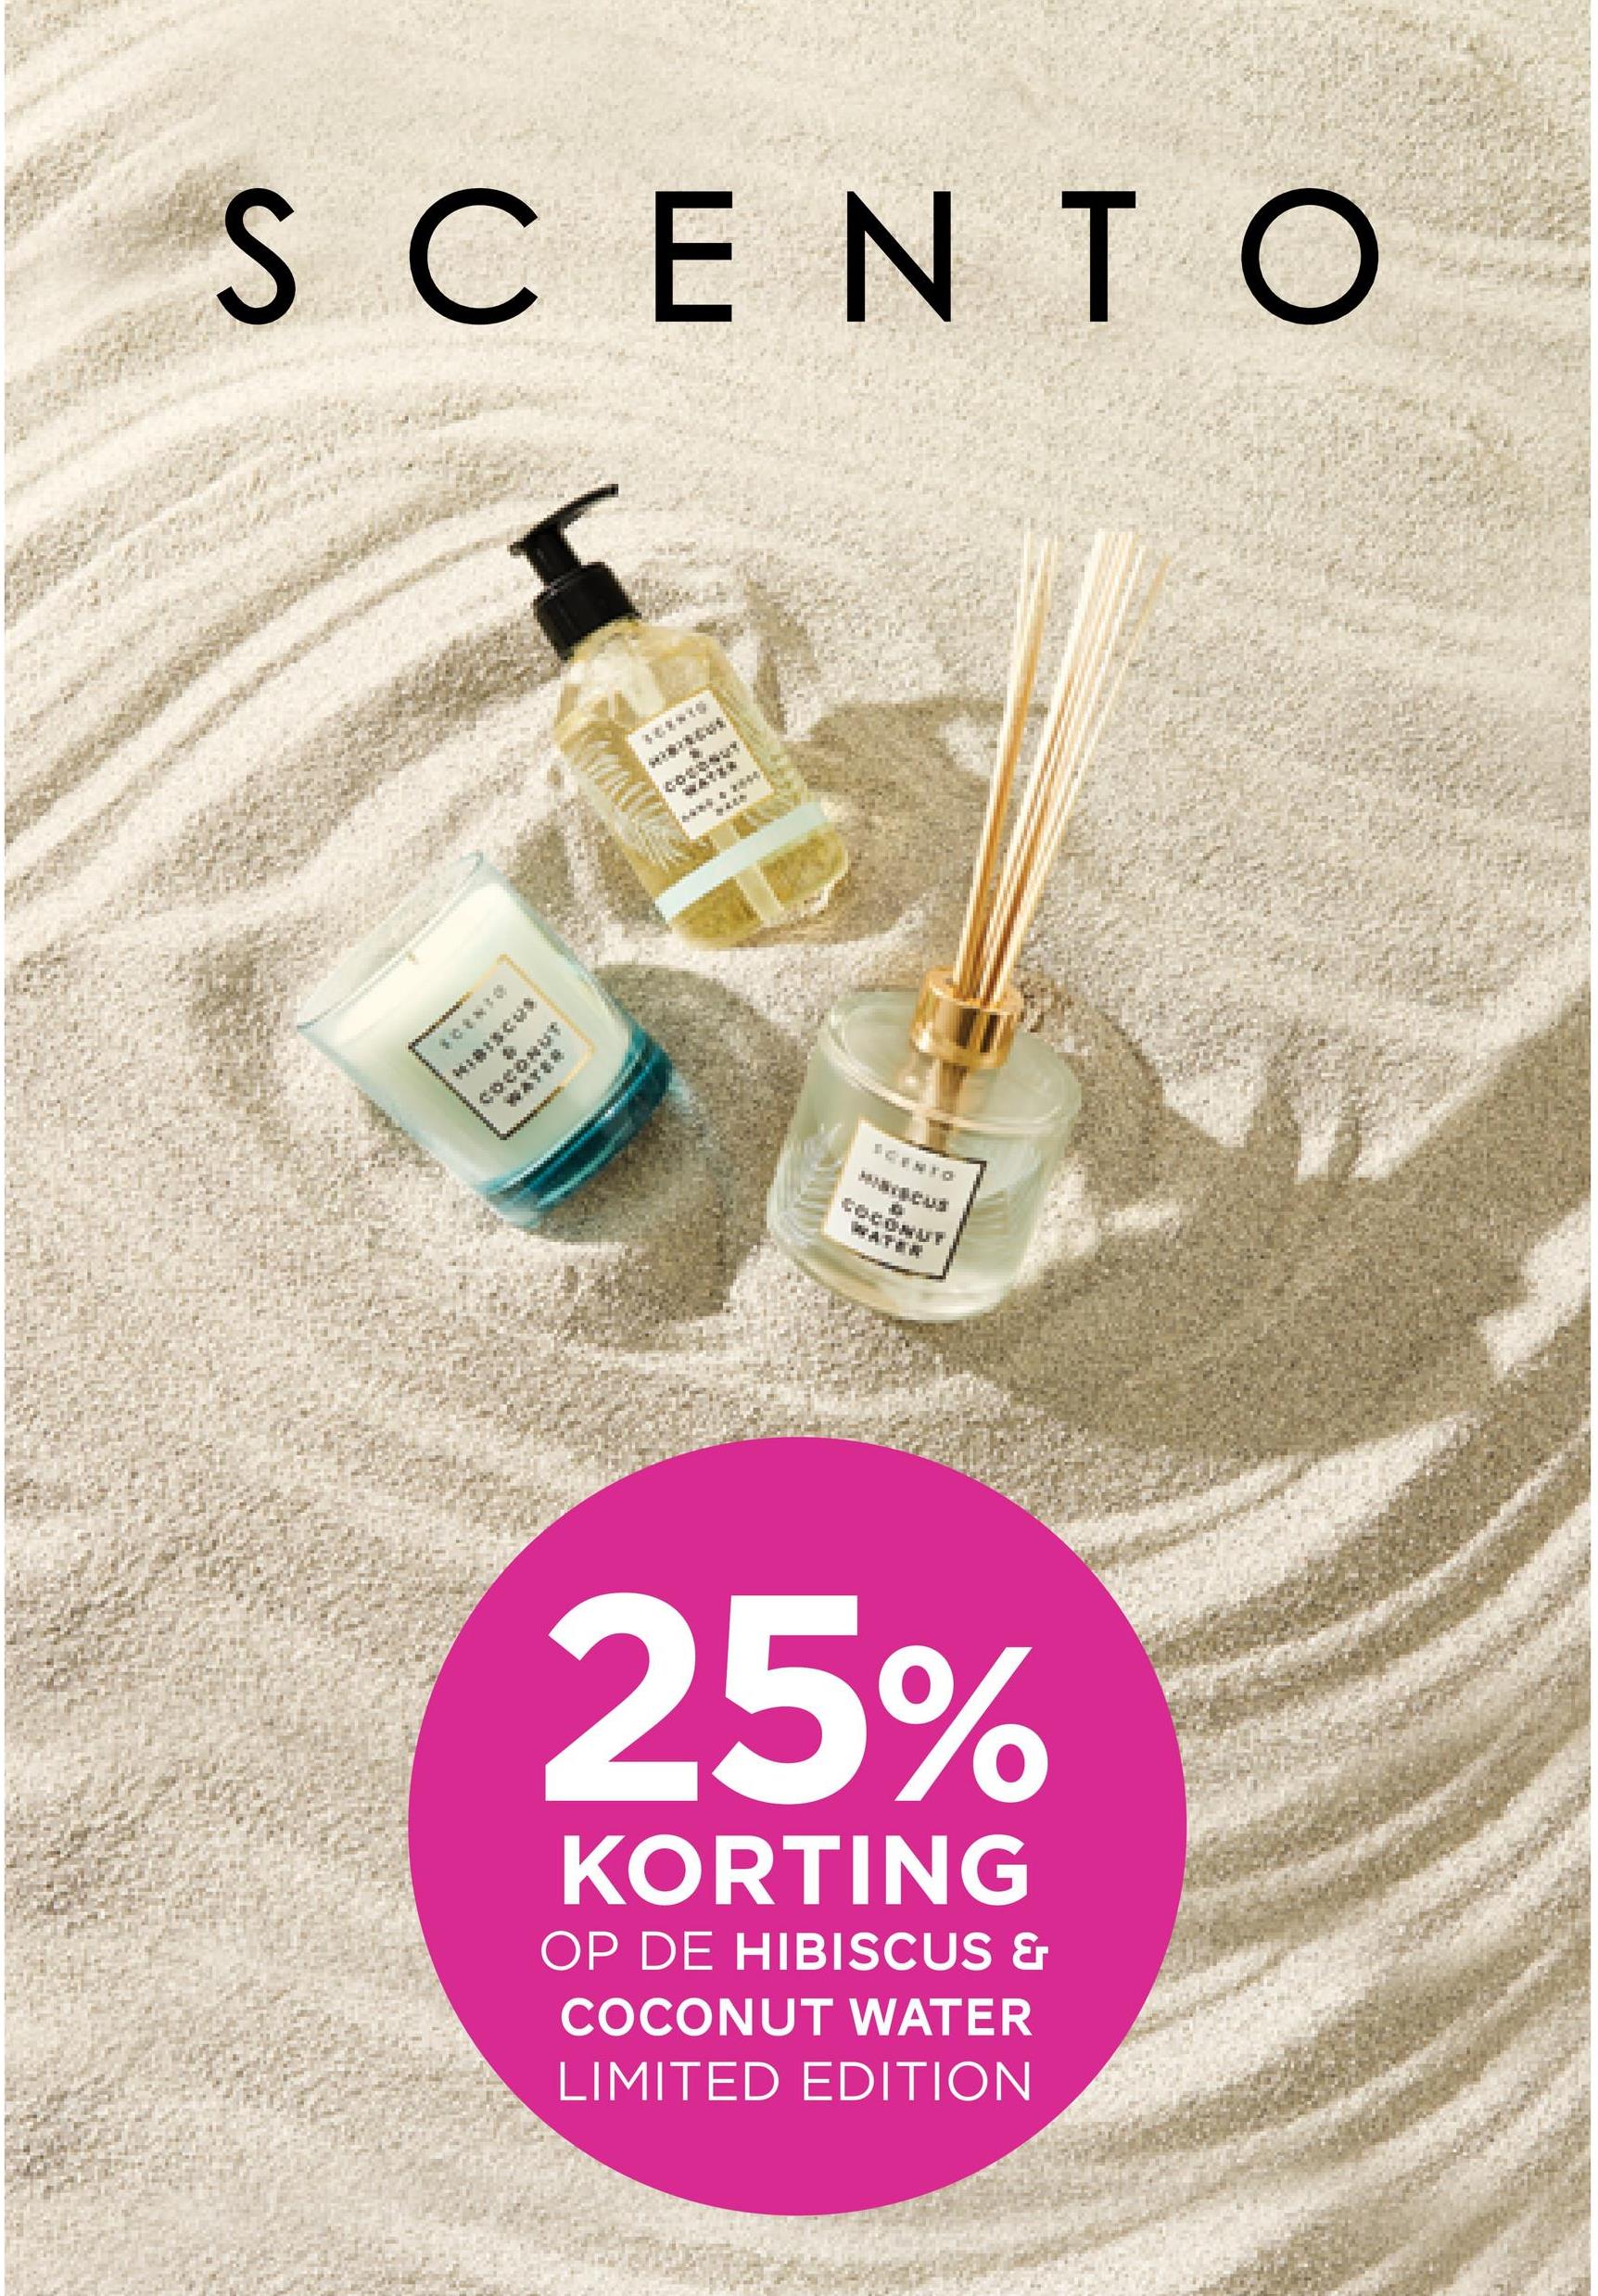 SCENTO
•
WATES
SALD
wwwwwwww
******
N:BISCUS
MARCUS
D
25%
KORTING
OP DE HIBISCUS &
COCONUT WATER
LIMITED EDITION